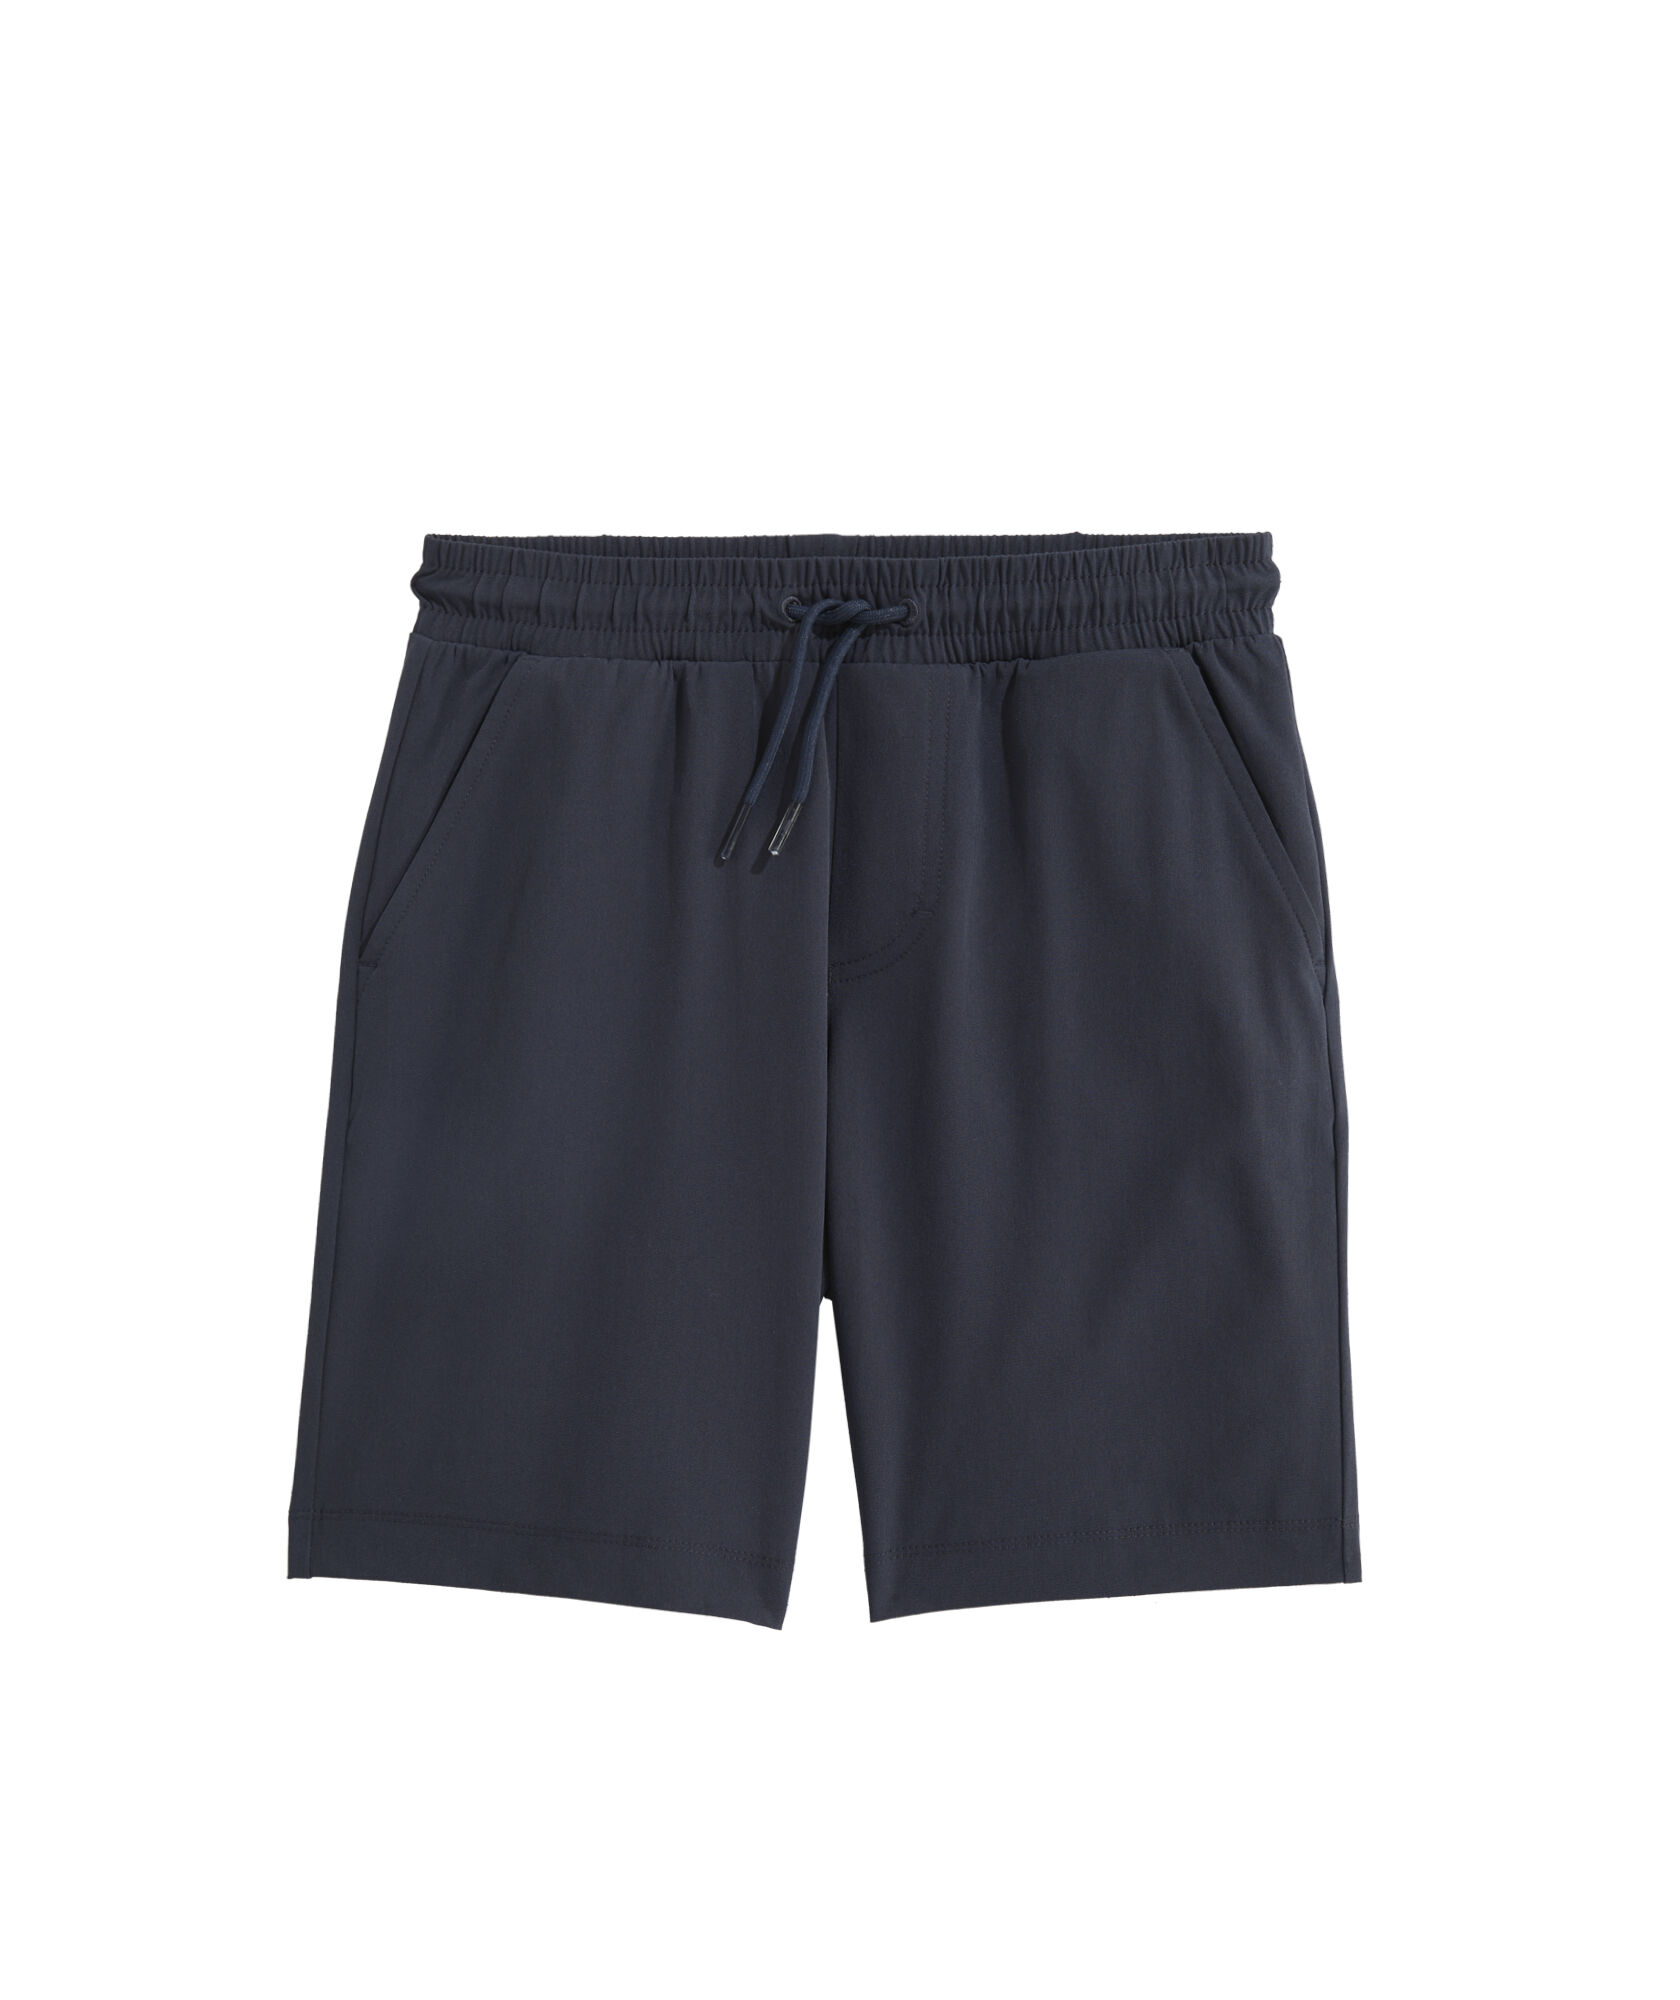 OUTLET Boys' Performance Jetty Shorts